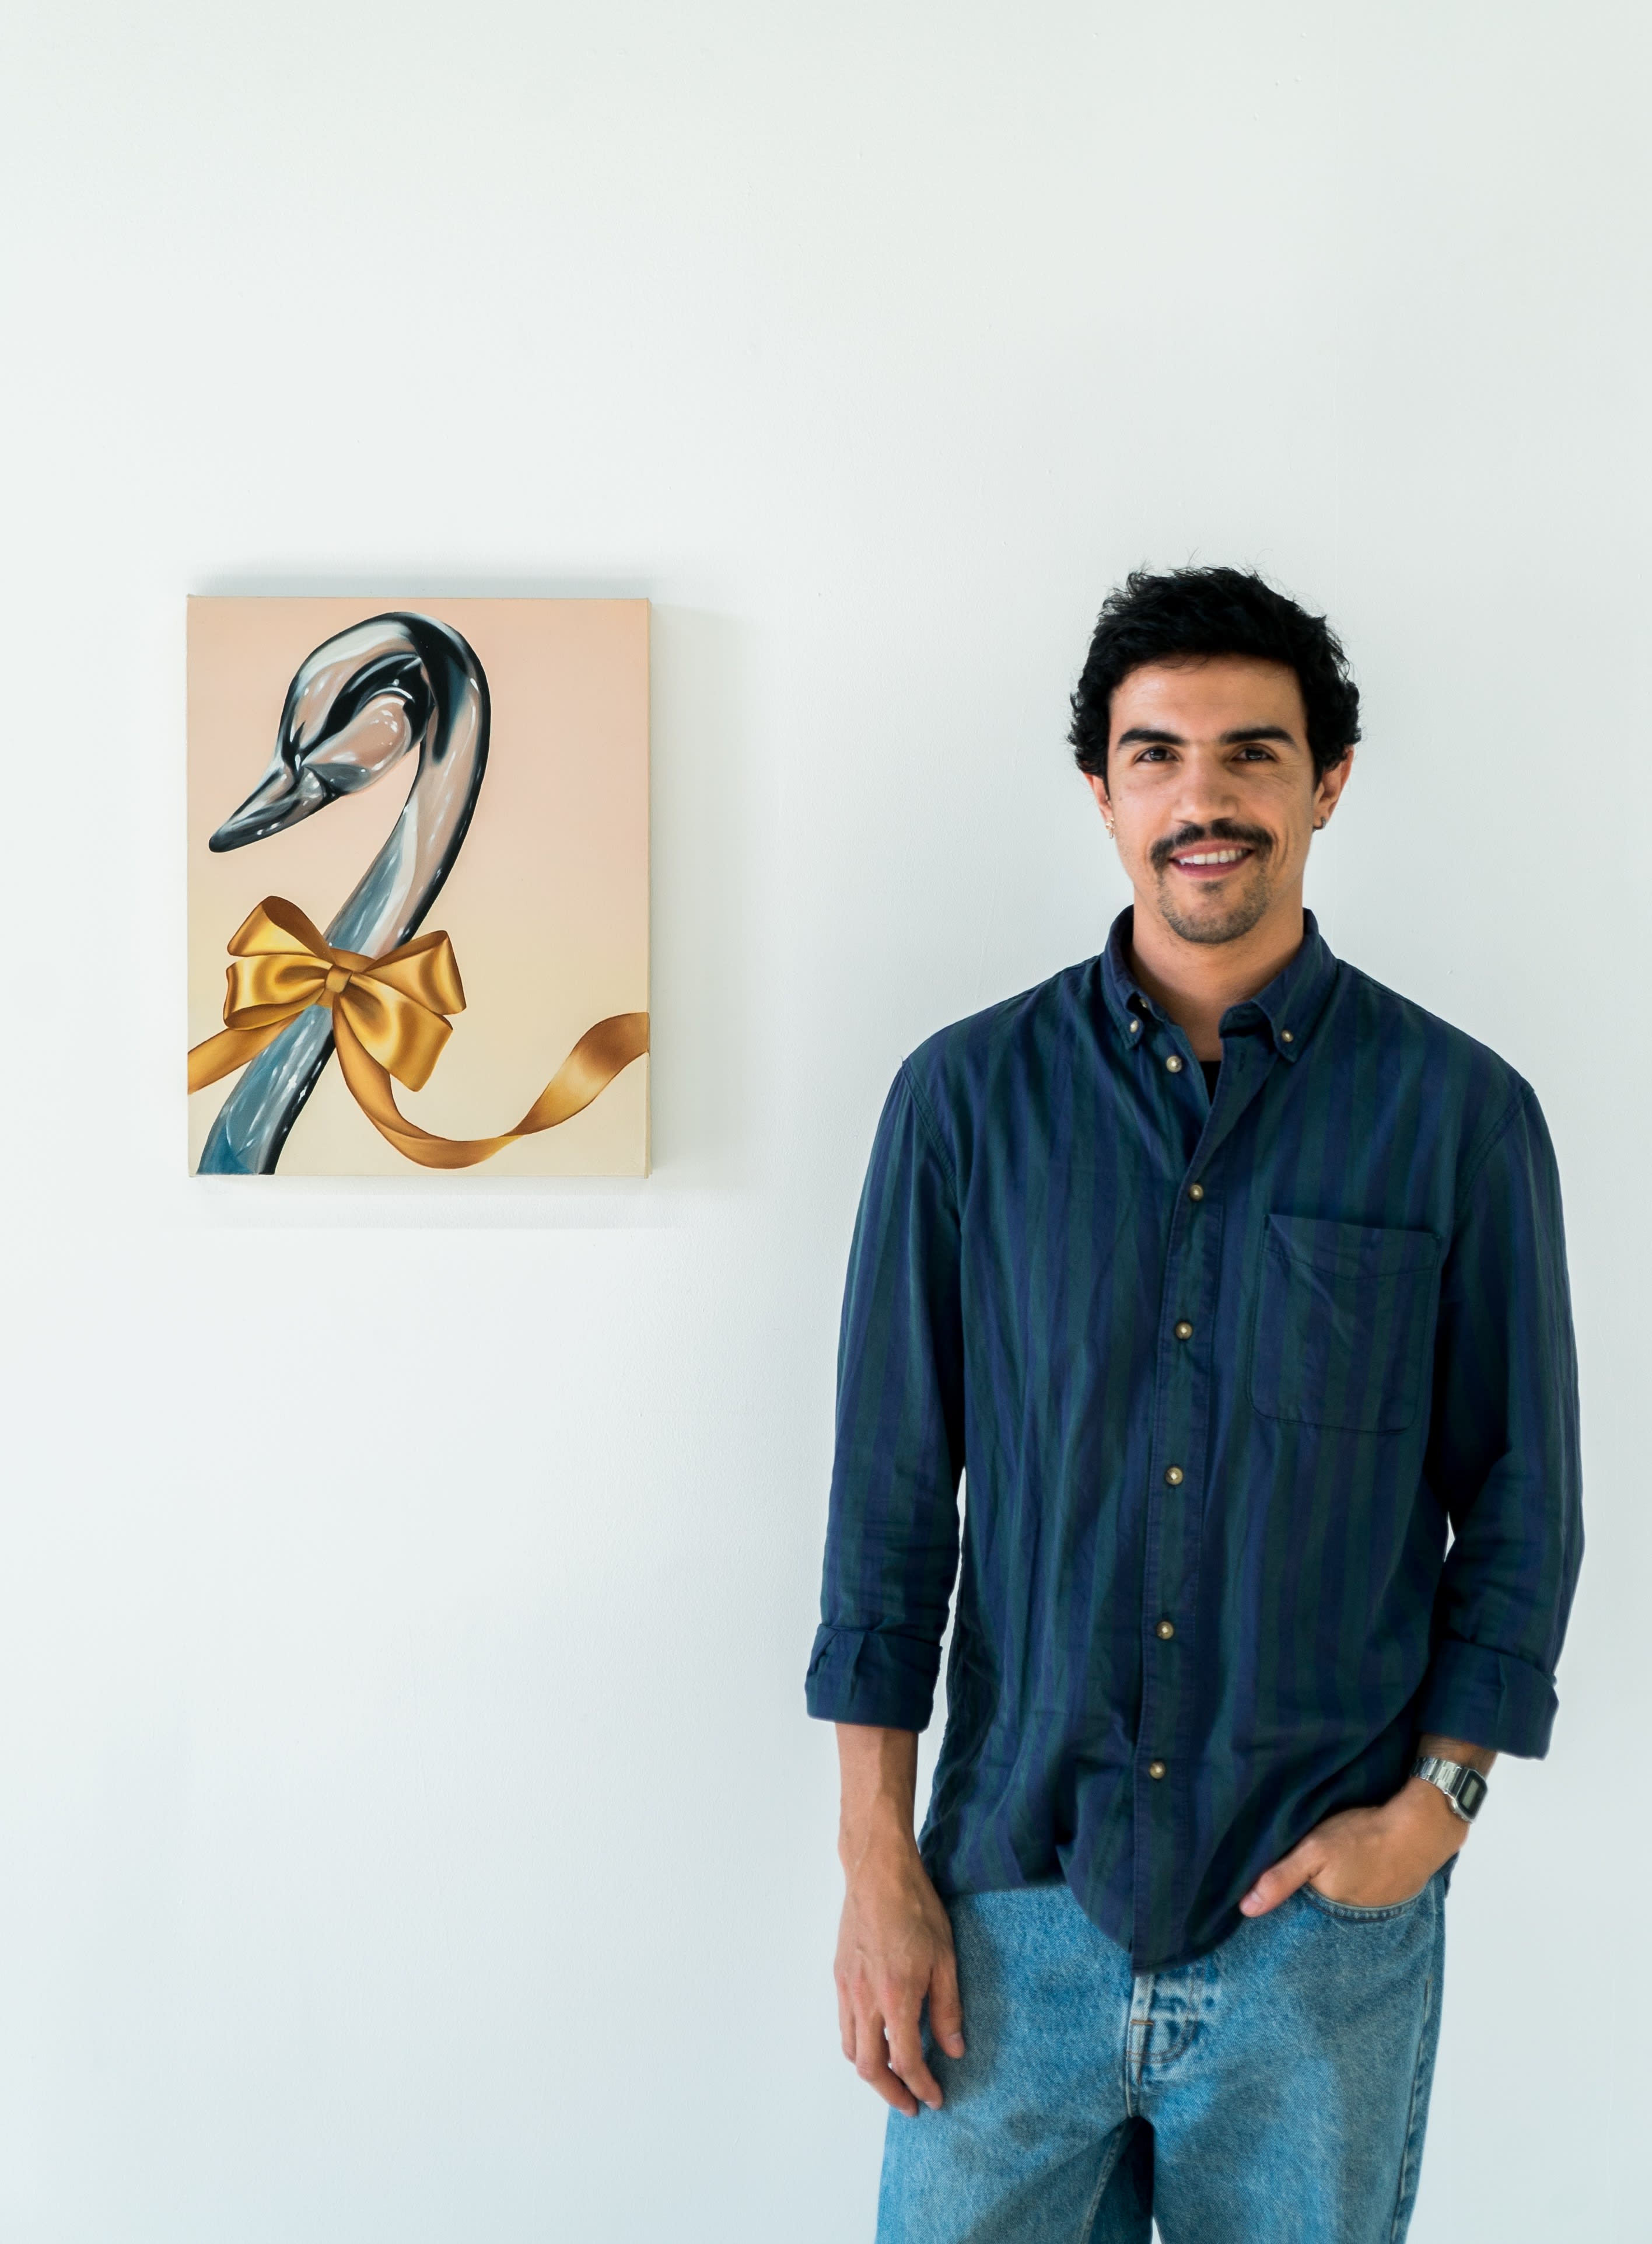 Photo of the artist Douglas de Souza next to one of his paintings